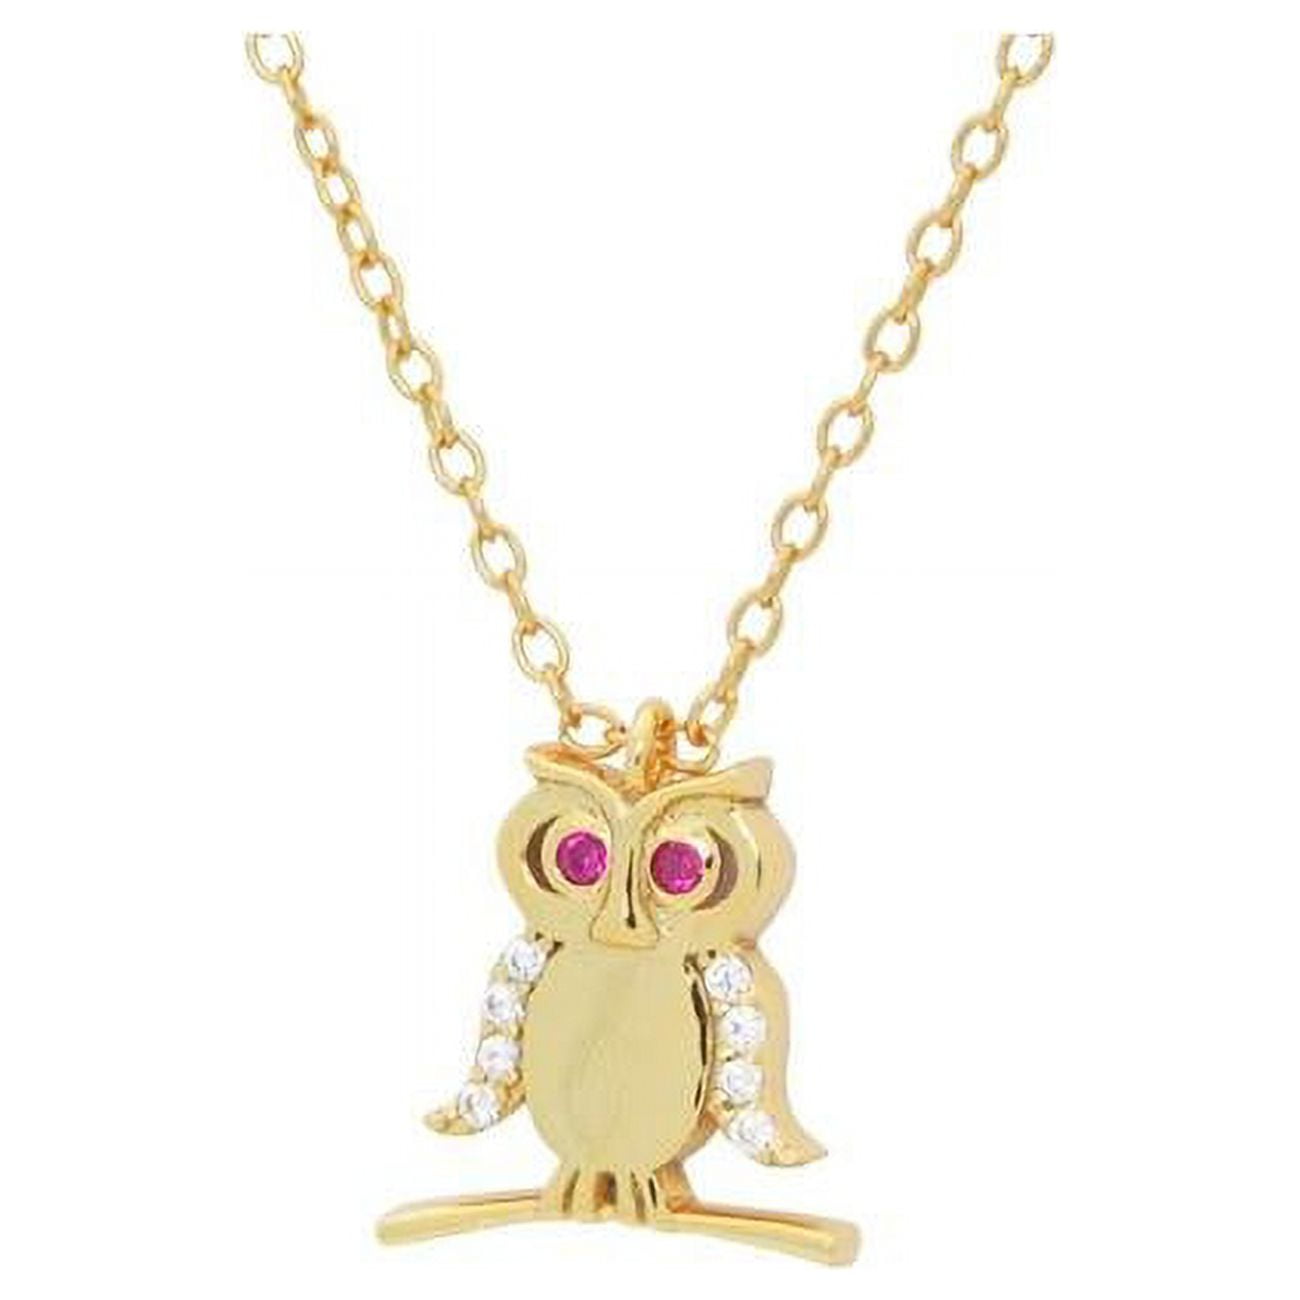 111208 16 & 2 In. Teen Red Cz Owl Pendant Necklace In 18k Gold Plated Silver